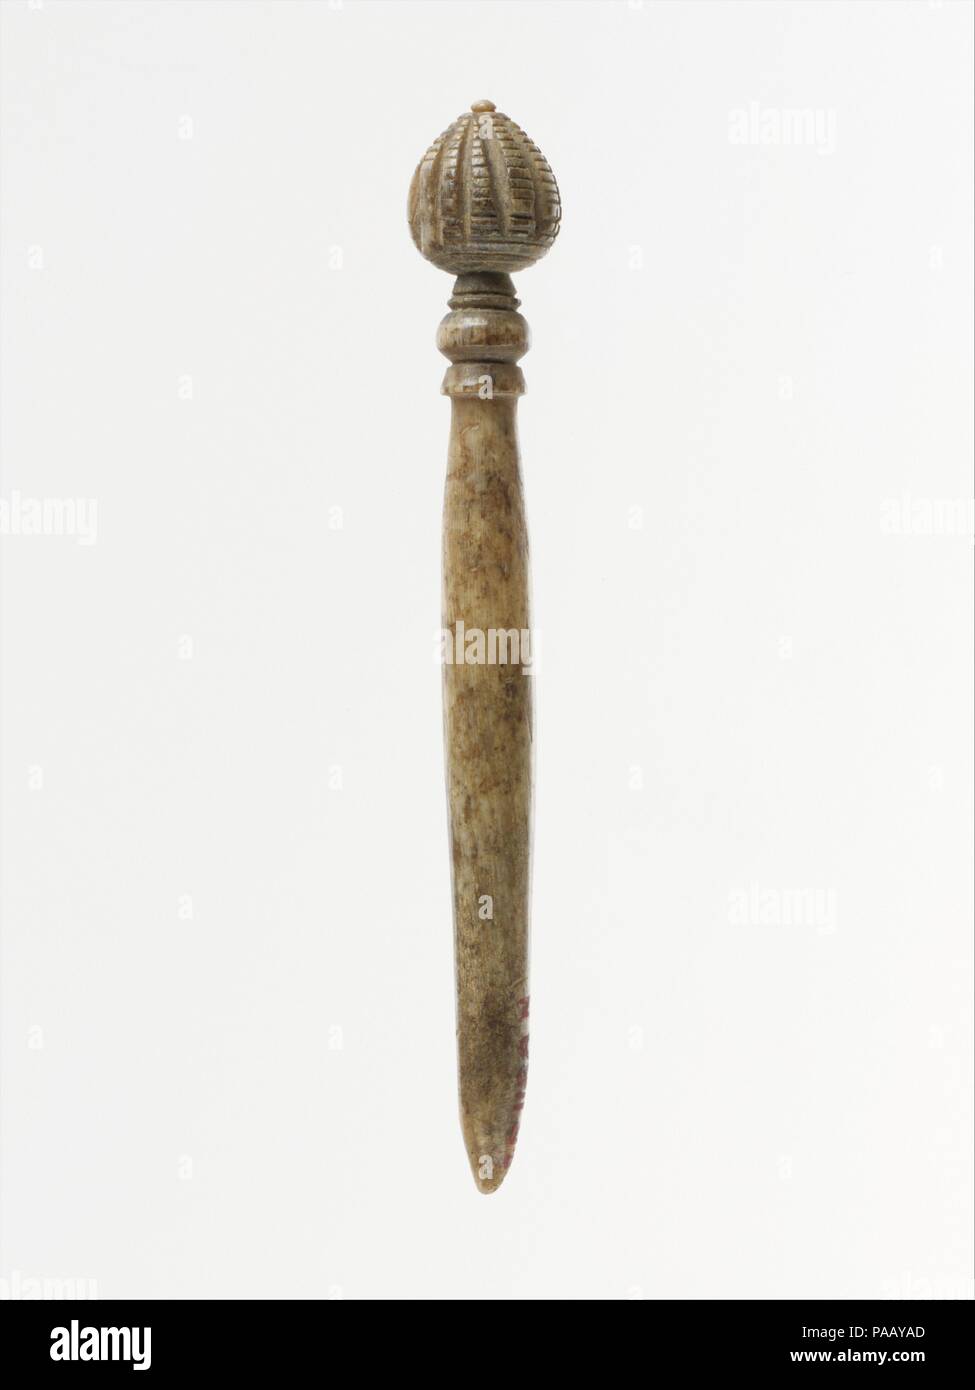 Bone pin. Culture: Roman. Dimensions: H.: 2 3/8 in. (6 cm). Date: ca. A.D. 300-450.  Similar pins found in excavations in Rome have been dated to the late Roman period (4th-5th century A.D.). Museum: Metropolitan Museum of Art, New York, USA. Stock Photo